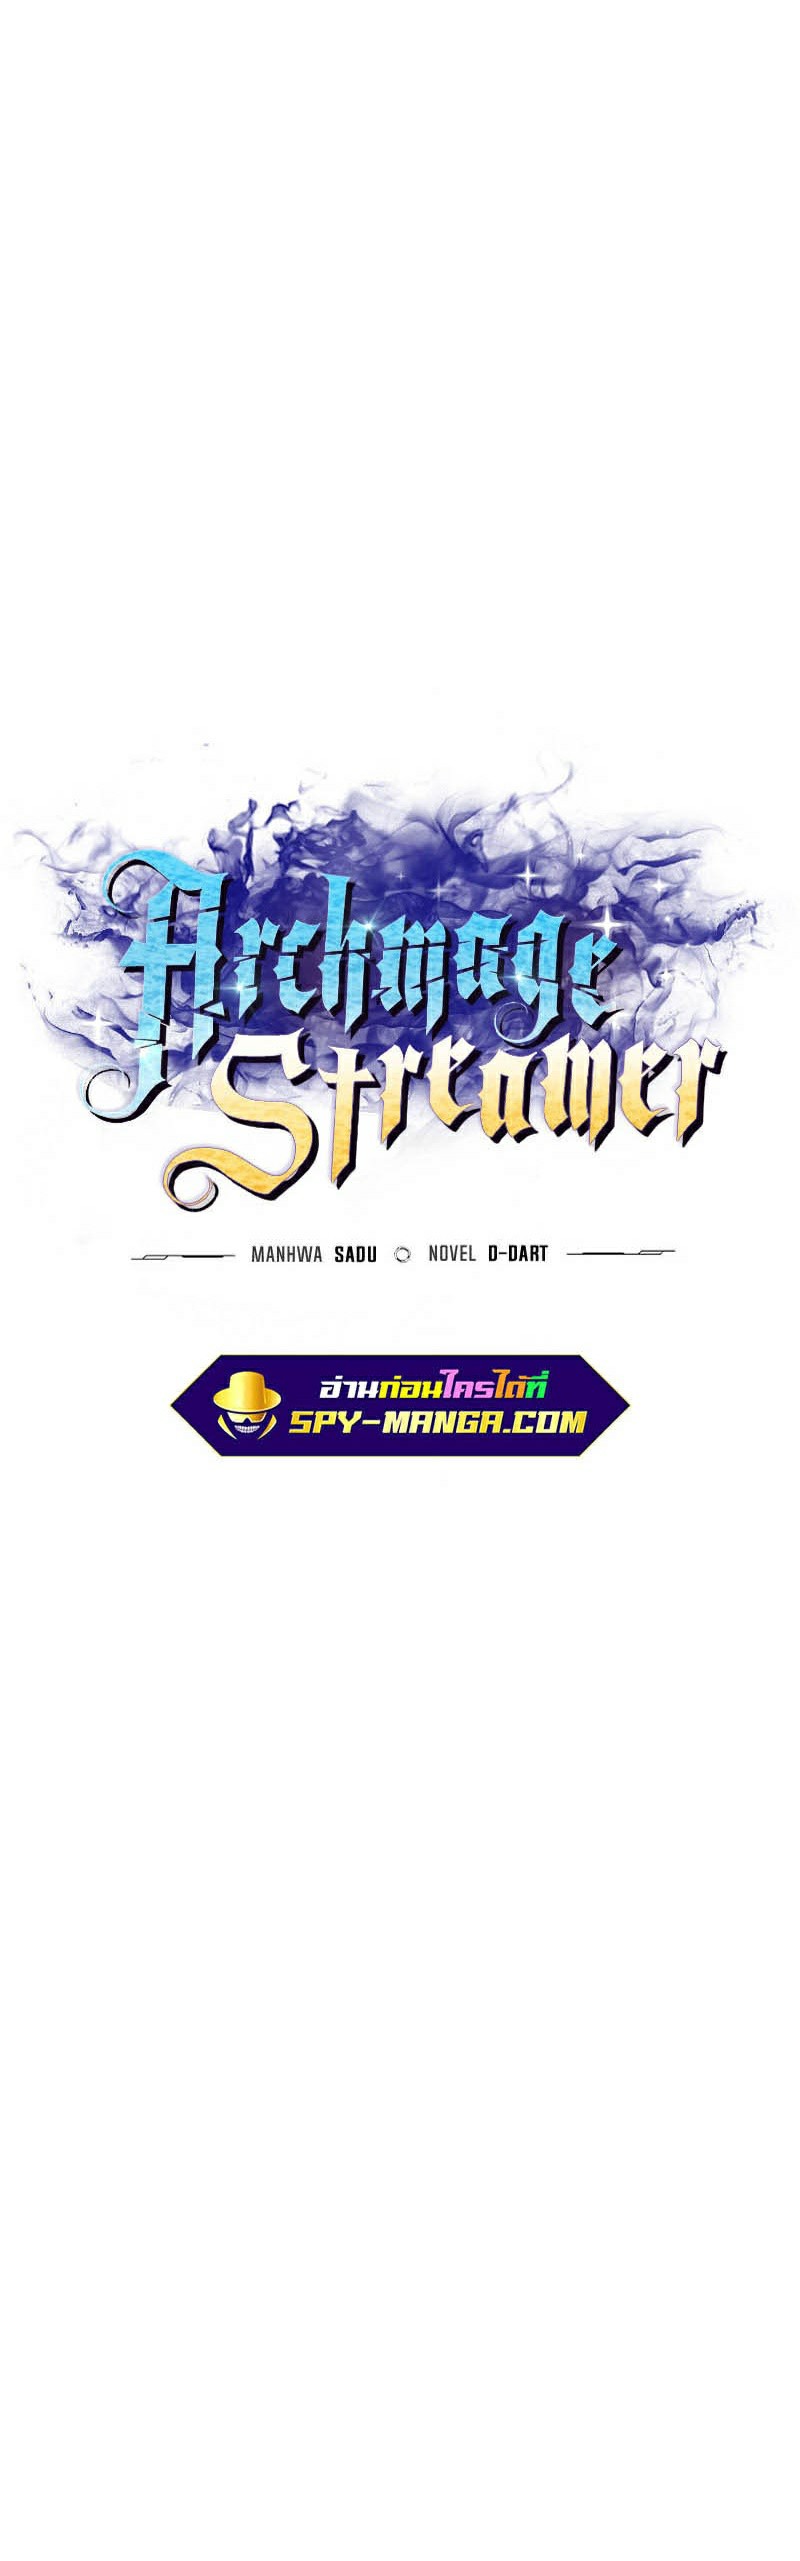 Archmage Streamer 81 20